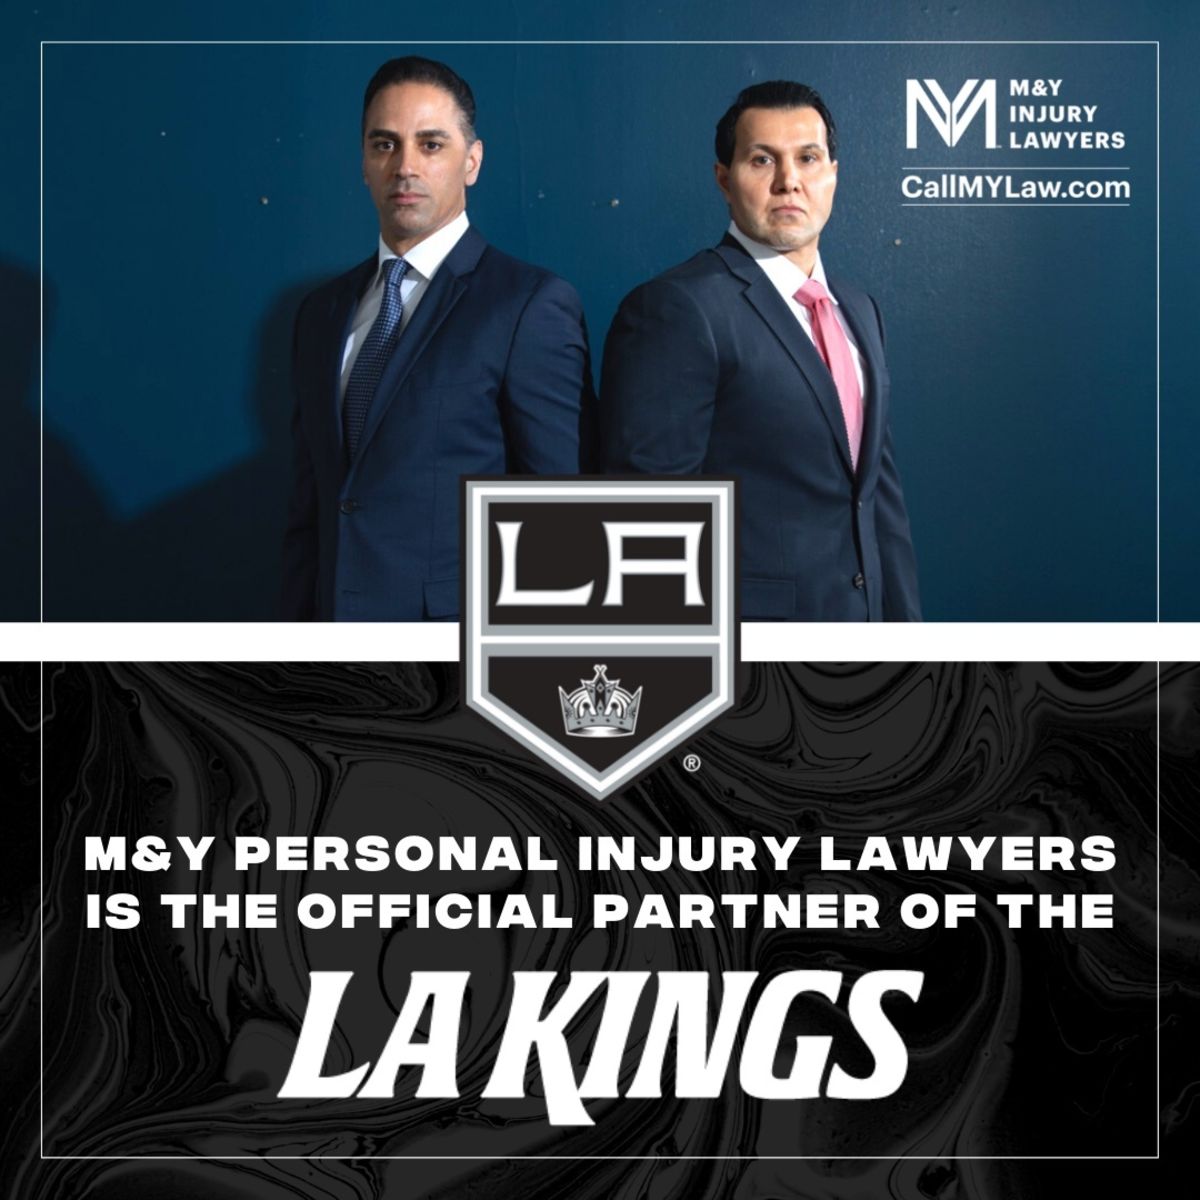 Multiyear Deal Makes Movagar & Yamin Personal Injury Lawyers the First-Ever Law Firm to Partner with both the LA Kings and Ontar